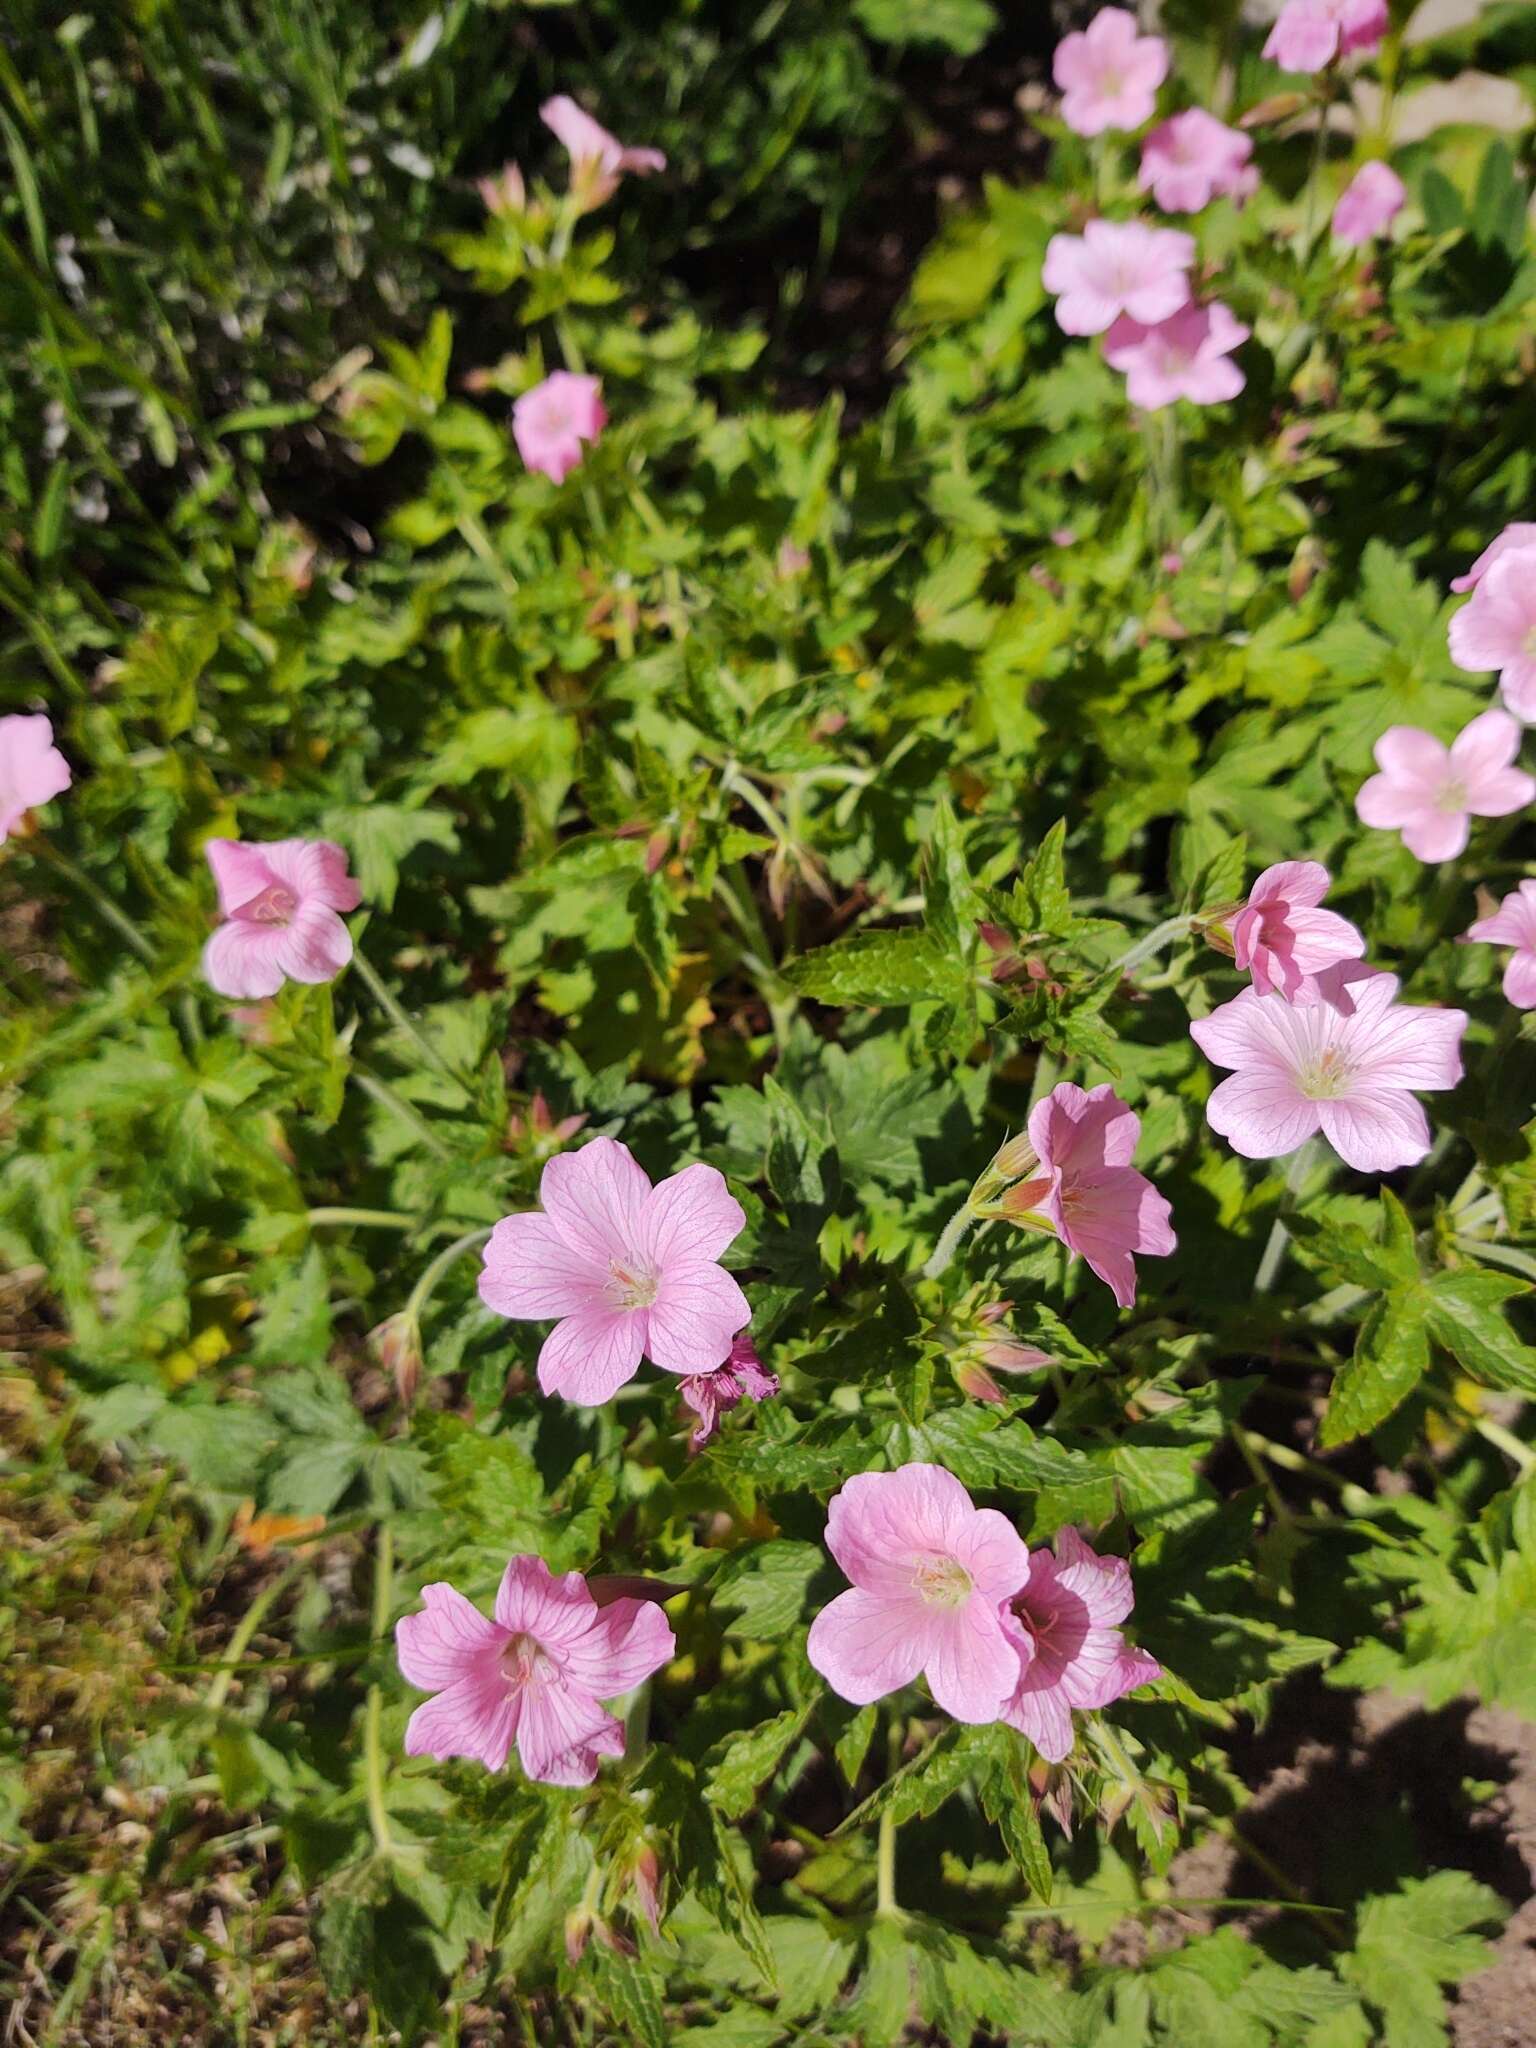 Image of Endres's cranesbill